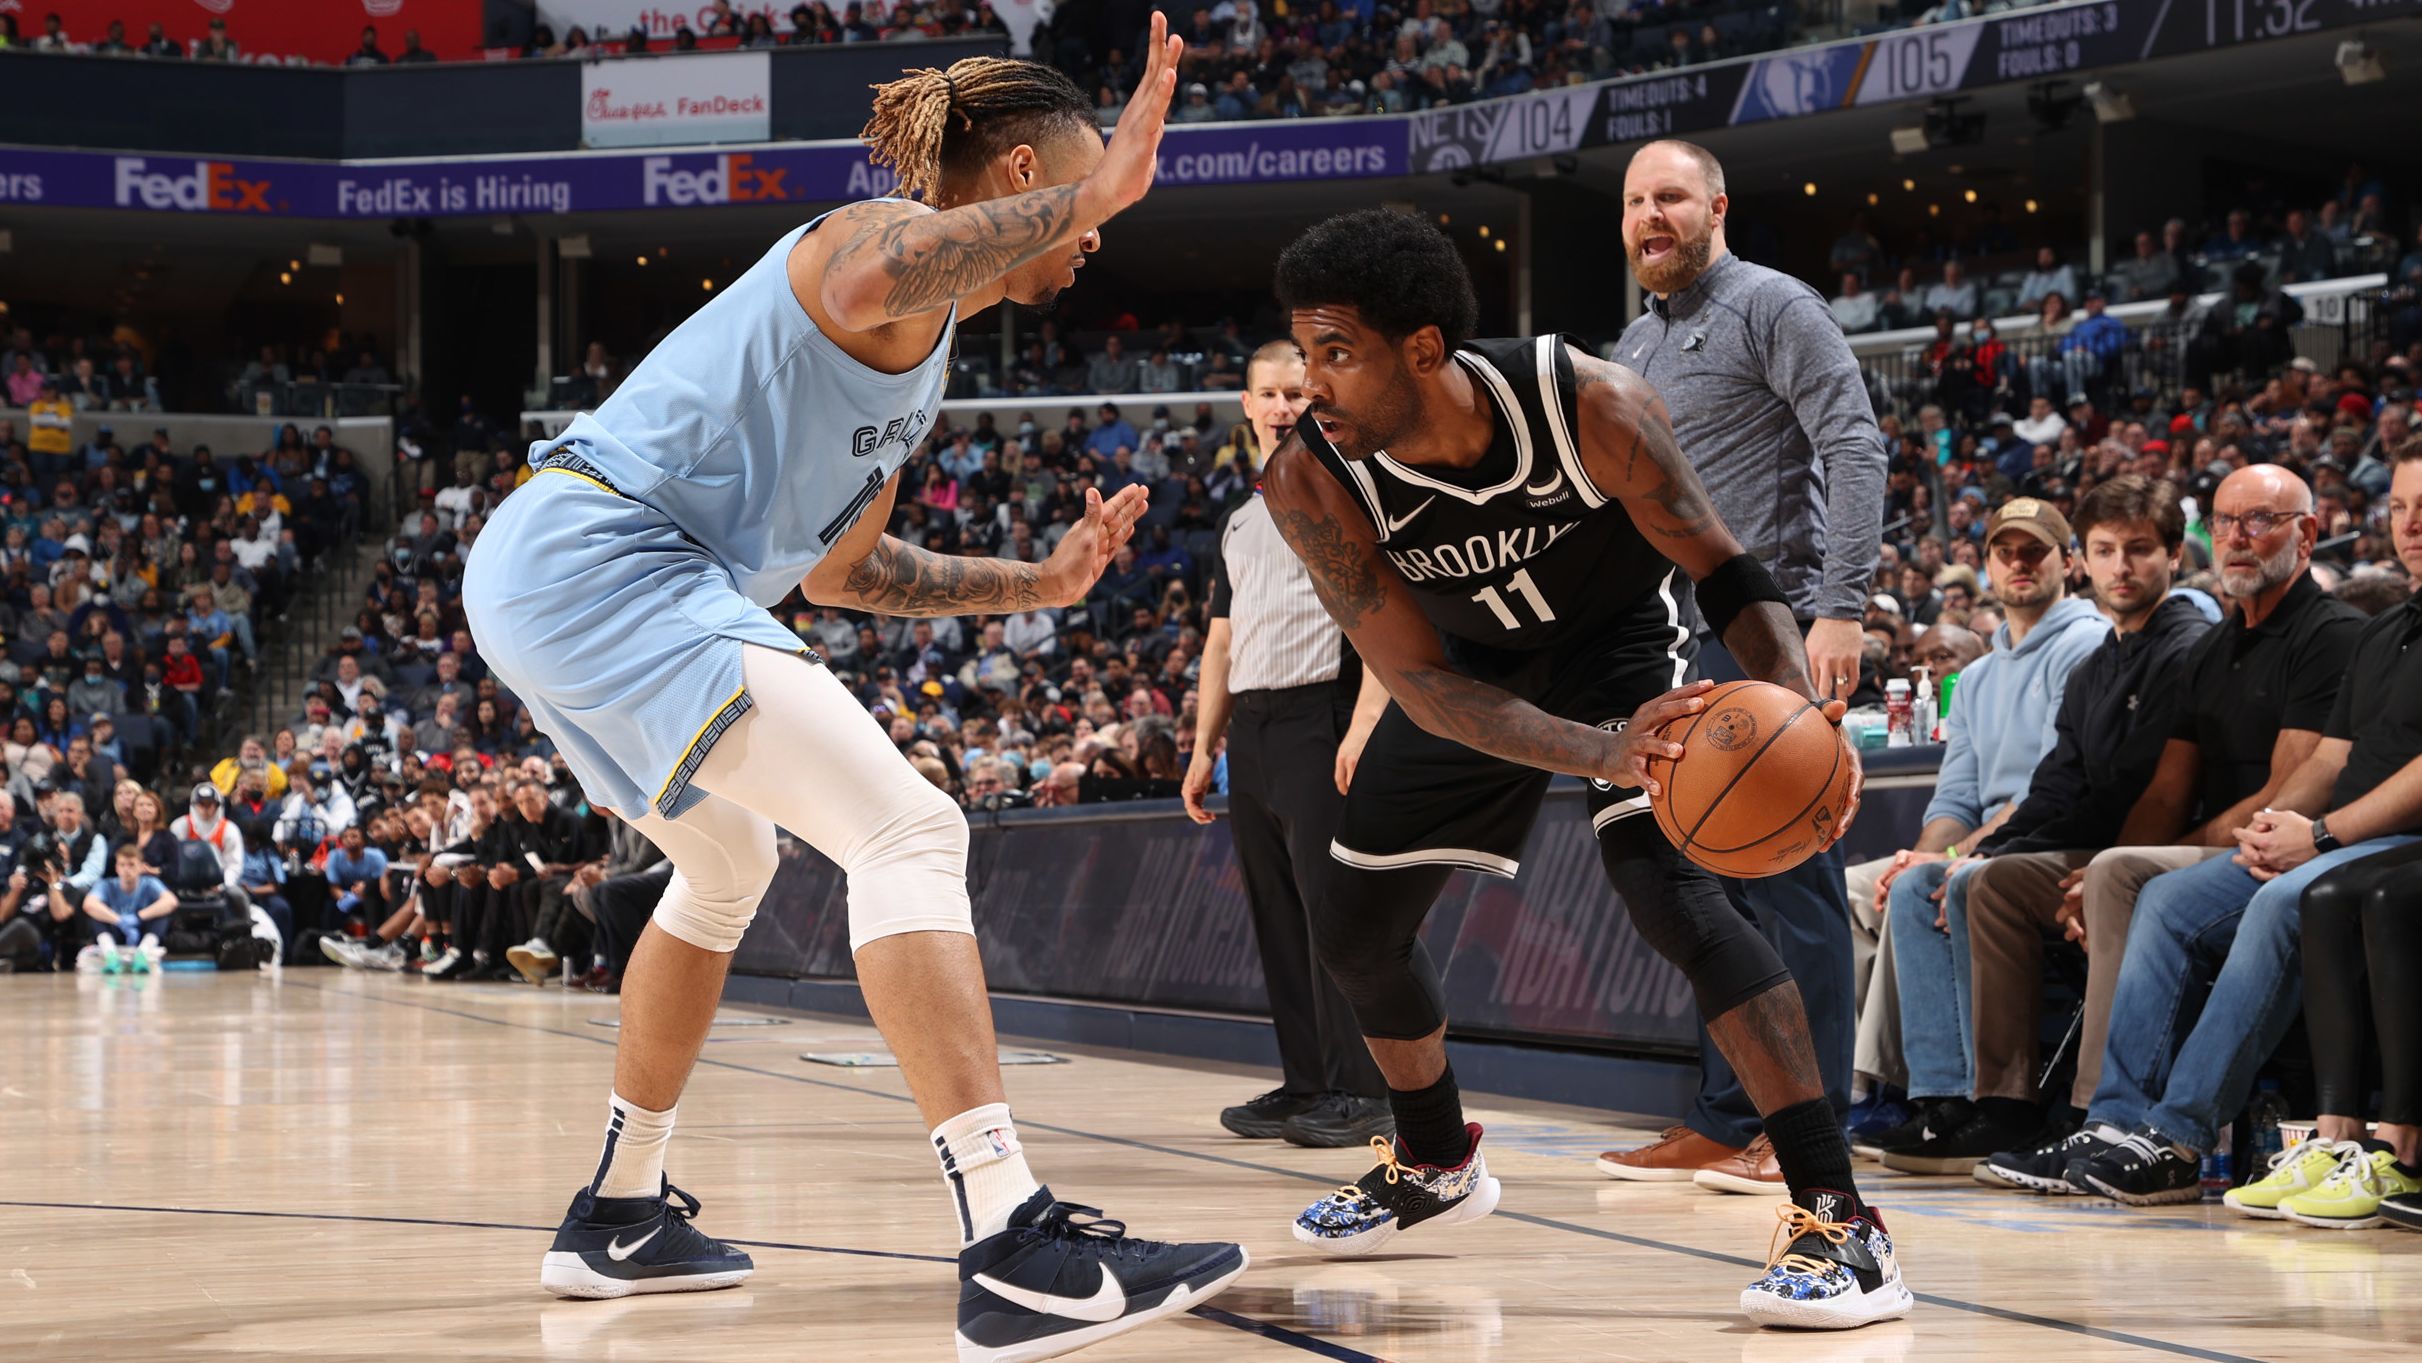 Brooklyn Nets guard Kyrie Irving, right, scored 43 points in Wednesday's game against the Memphis Grizzlies in Memphis.